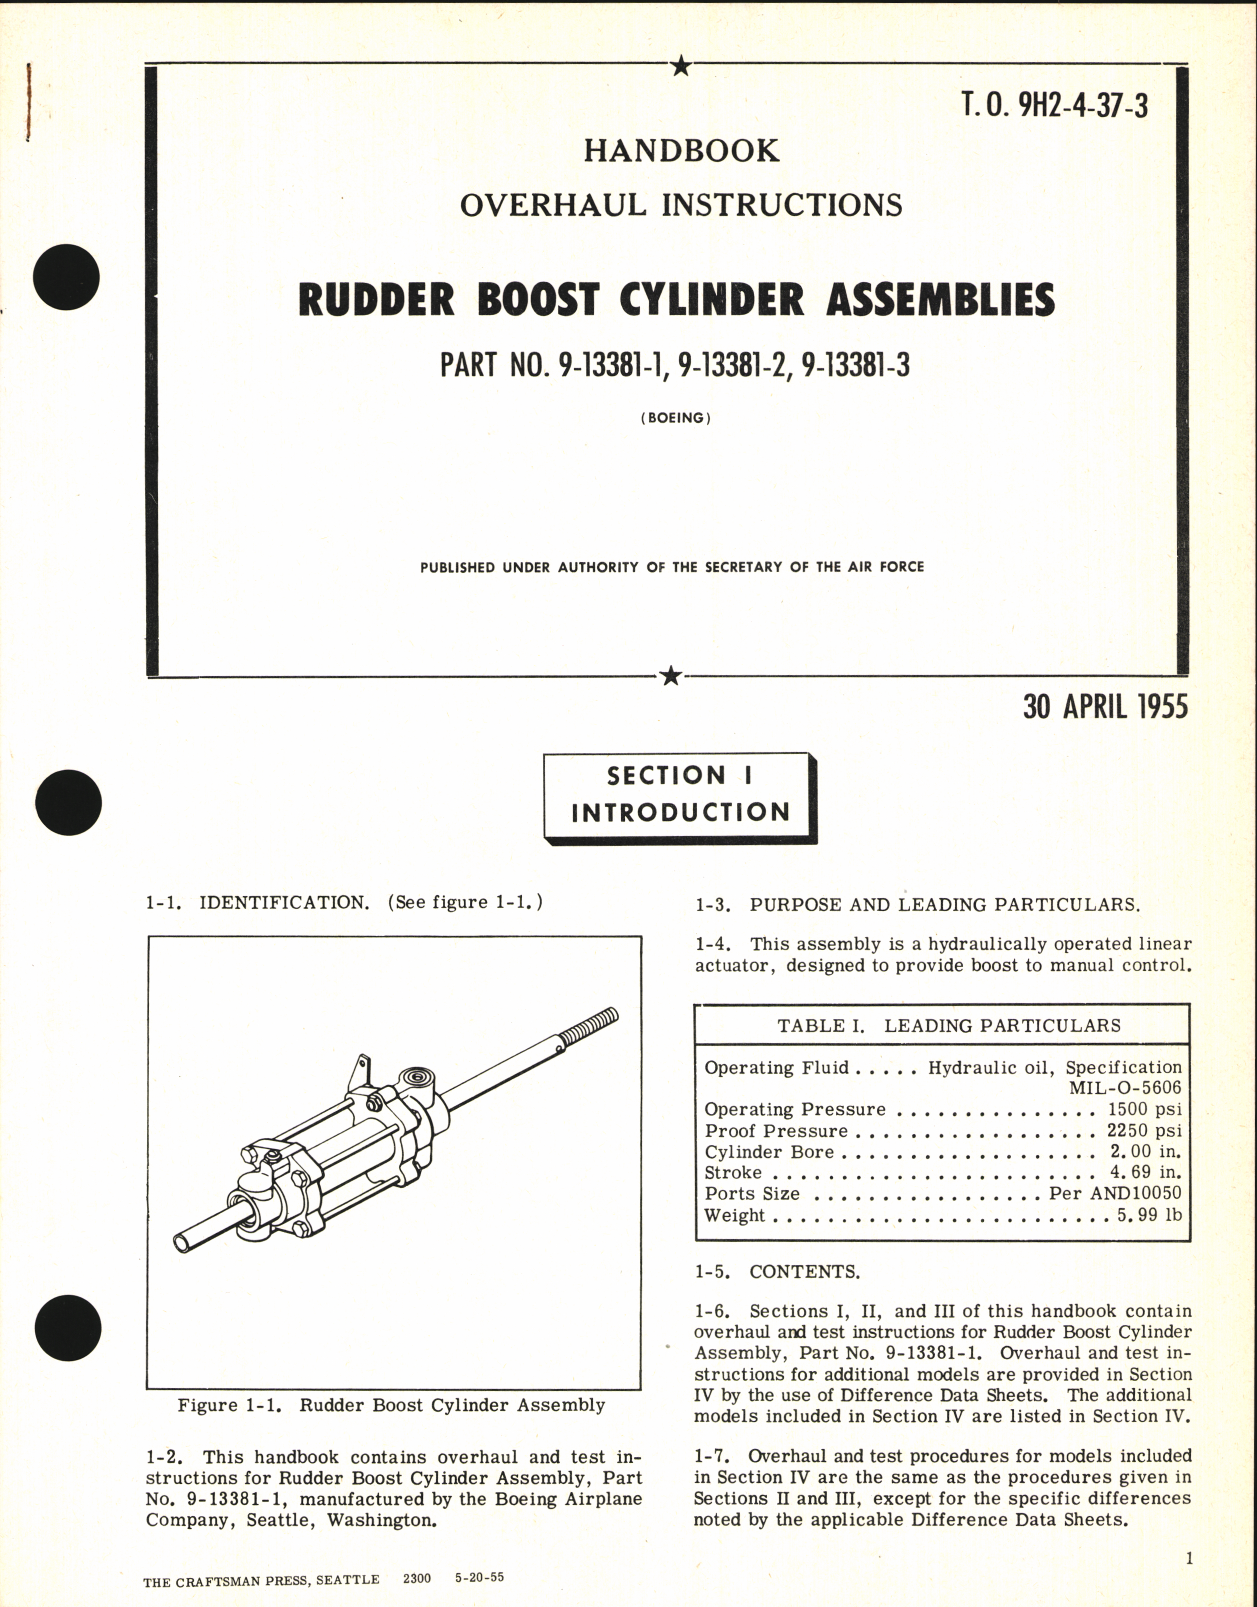 Sample page 1 from AirCorps Library document: Overhaul Instructions for Rudder Boost Cylinder Assemblies